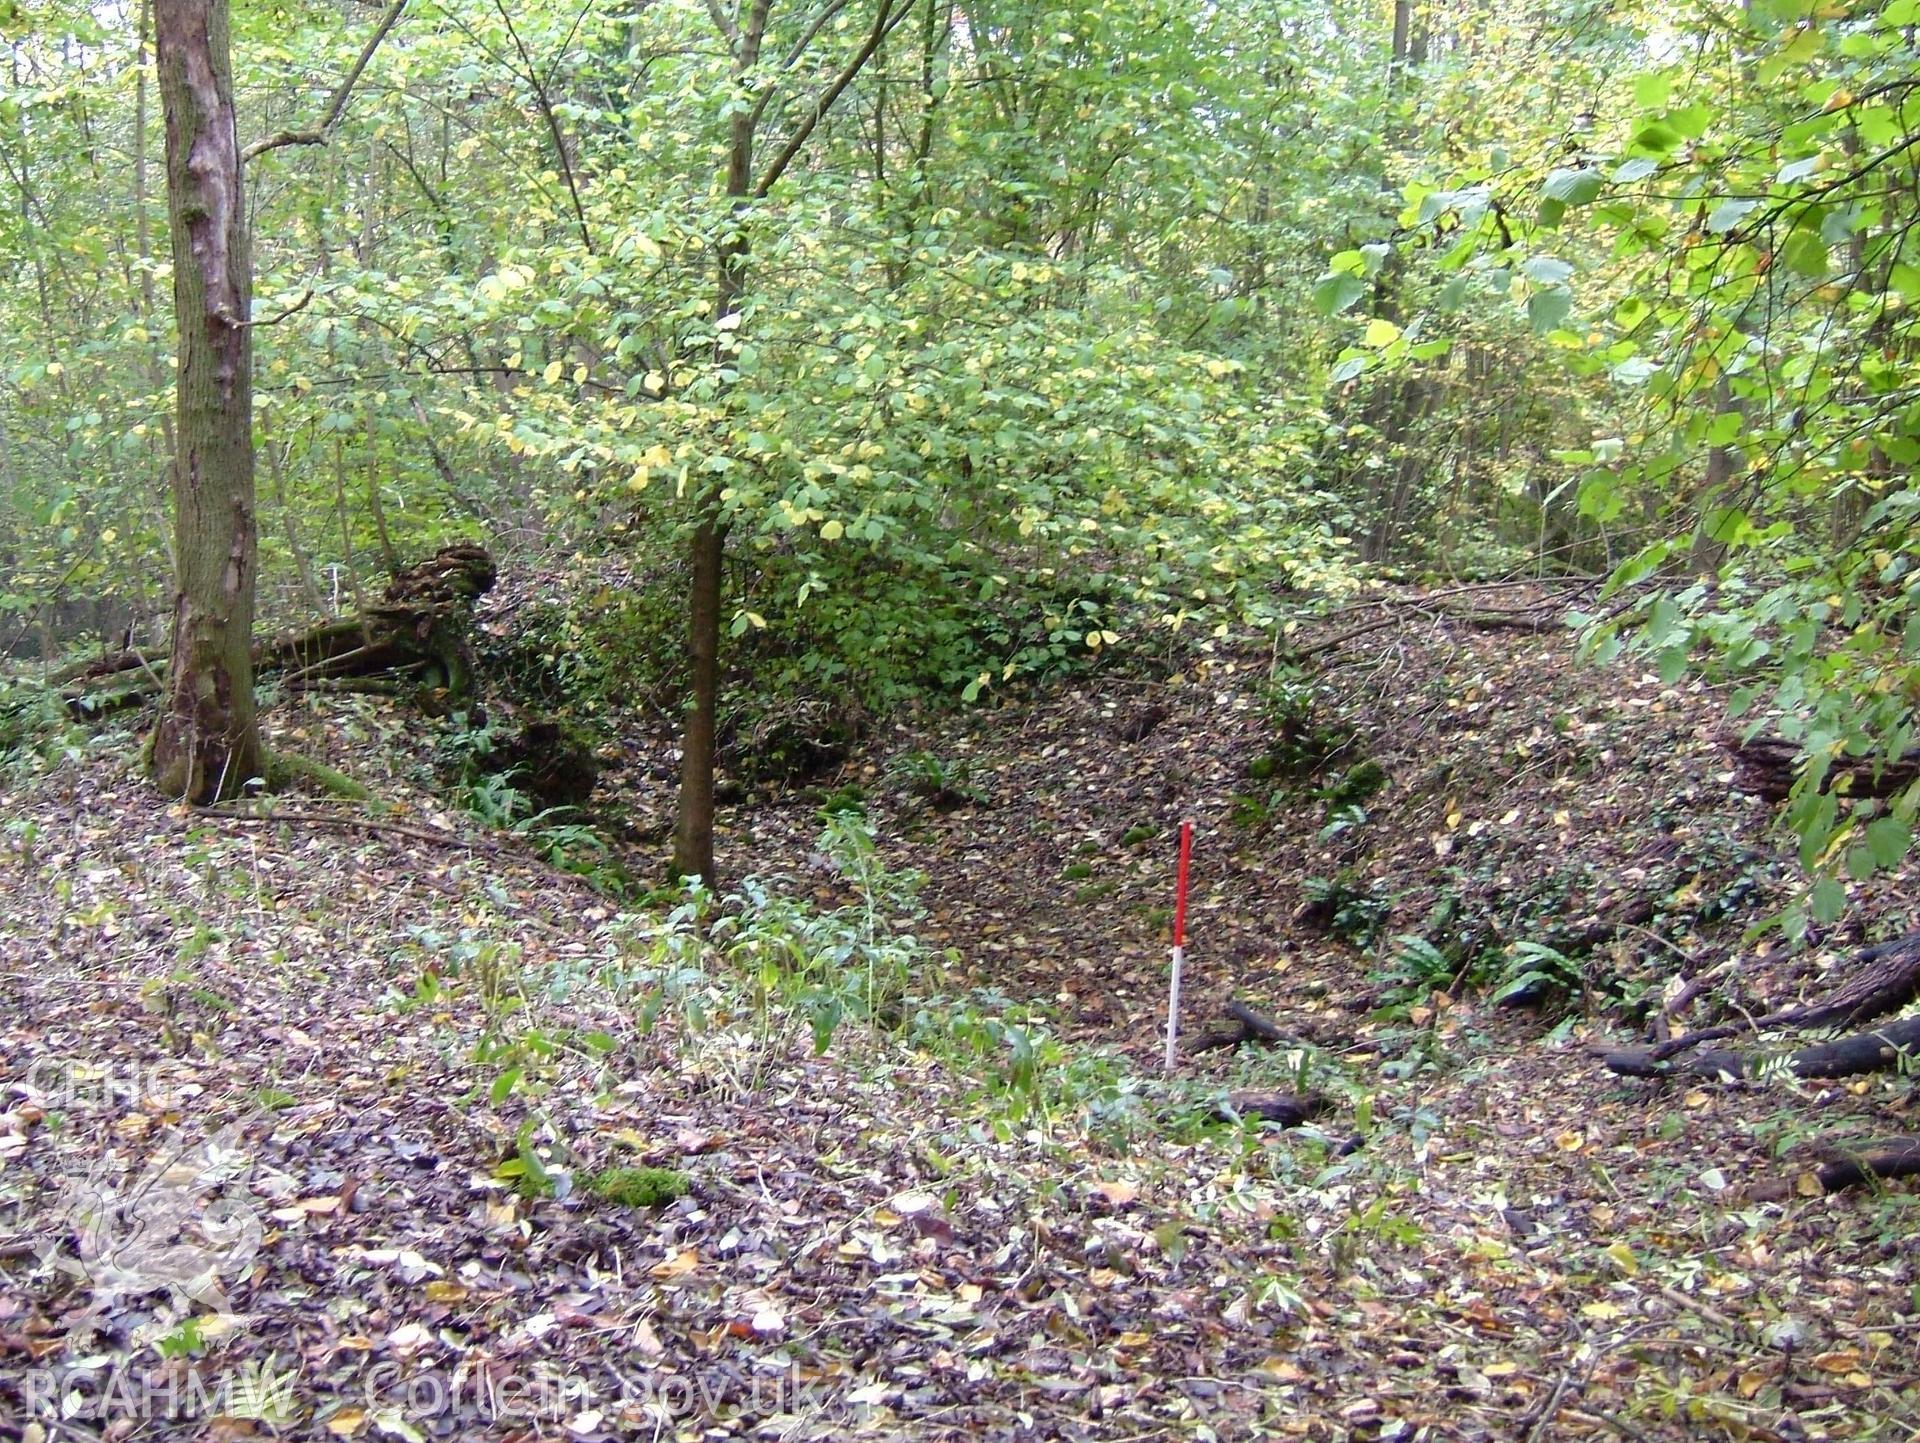 Digital colour photograph taken as part of an archaeological survey at the Piercefield walks, 2004. The photograph shows part of the Piercefield Estate.